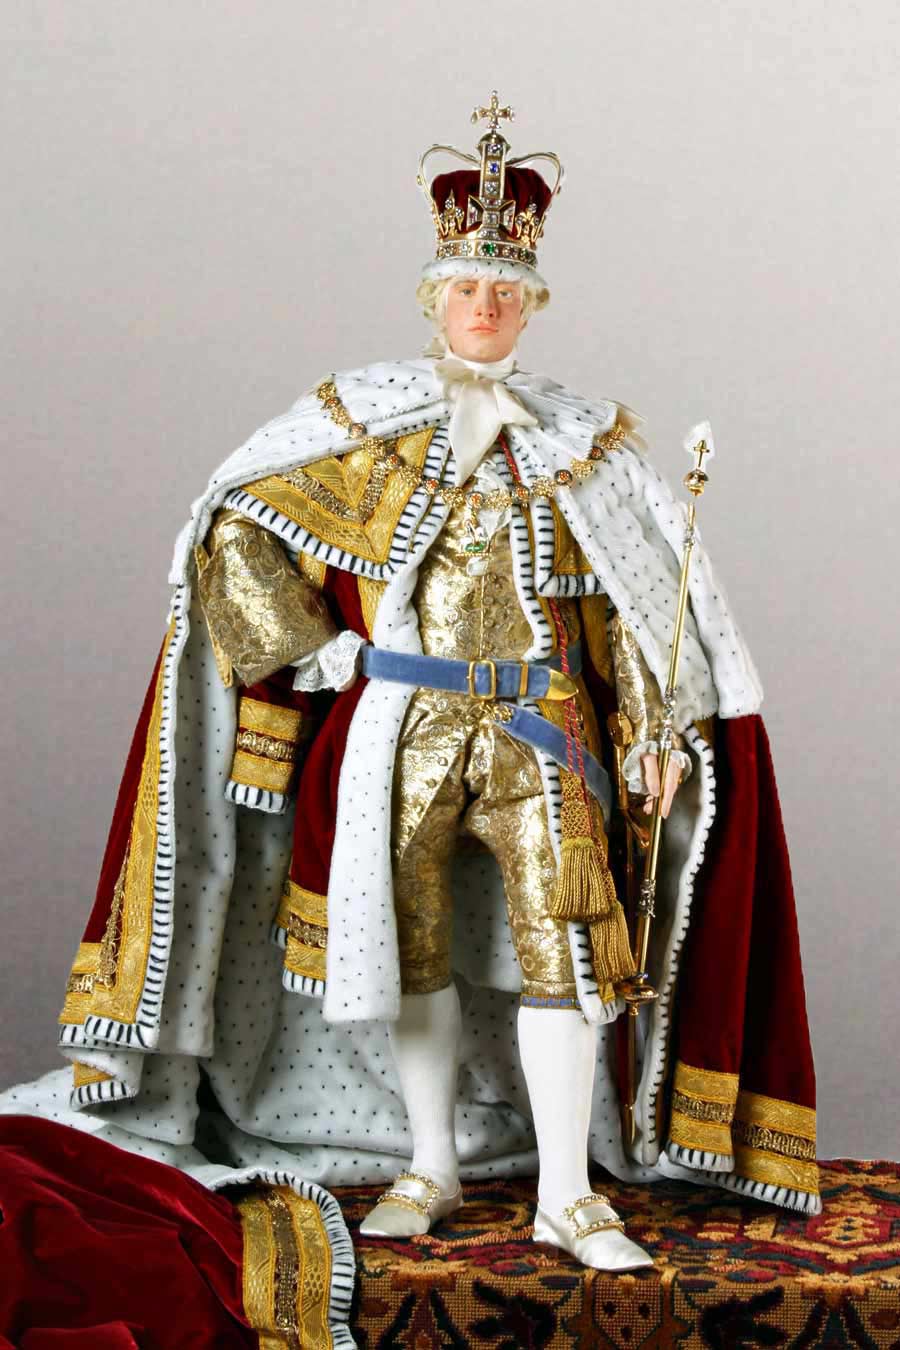 King George III, dedicated to duty and preserving England's honor.